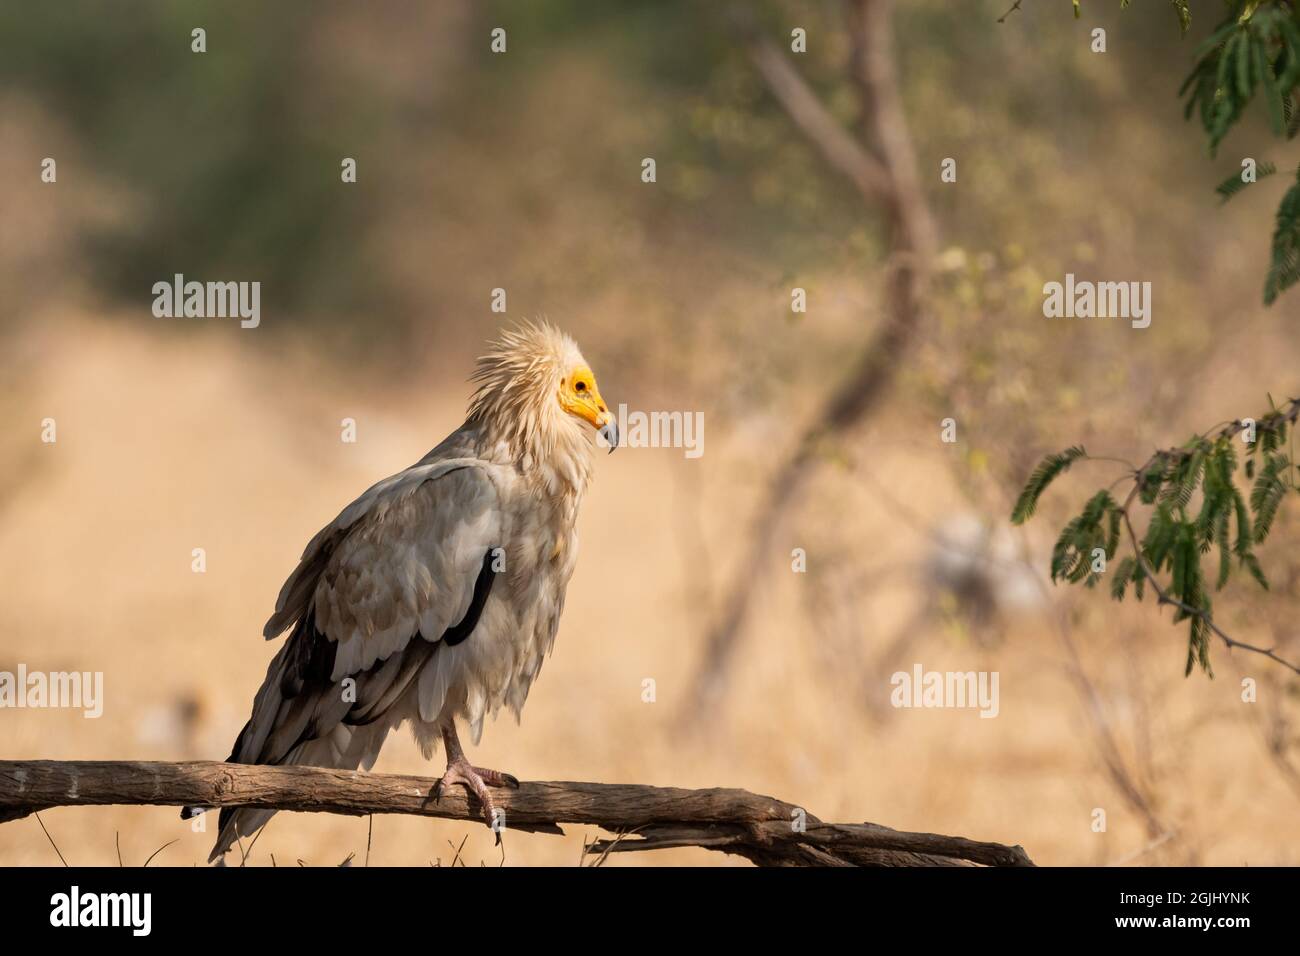 Egyptian vulture or Neophron percnopterus bird portrait at jorbeer conservation reserve bikaner rajasthan India Stock Photo